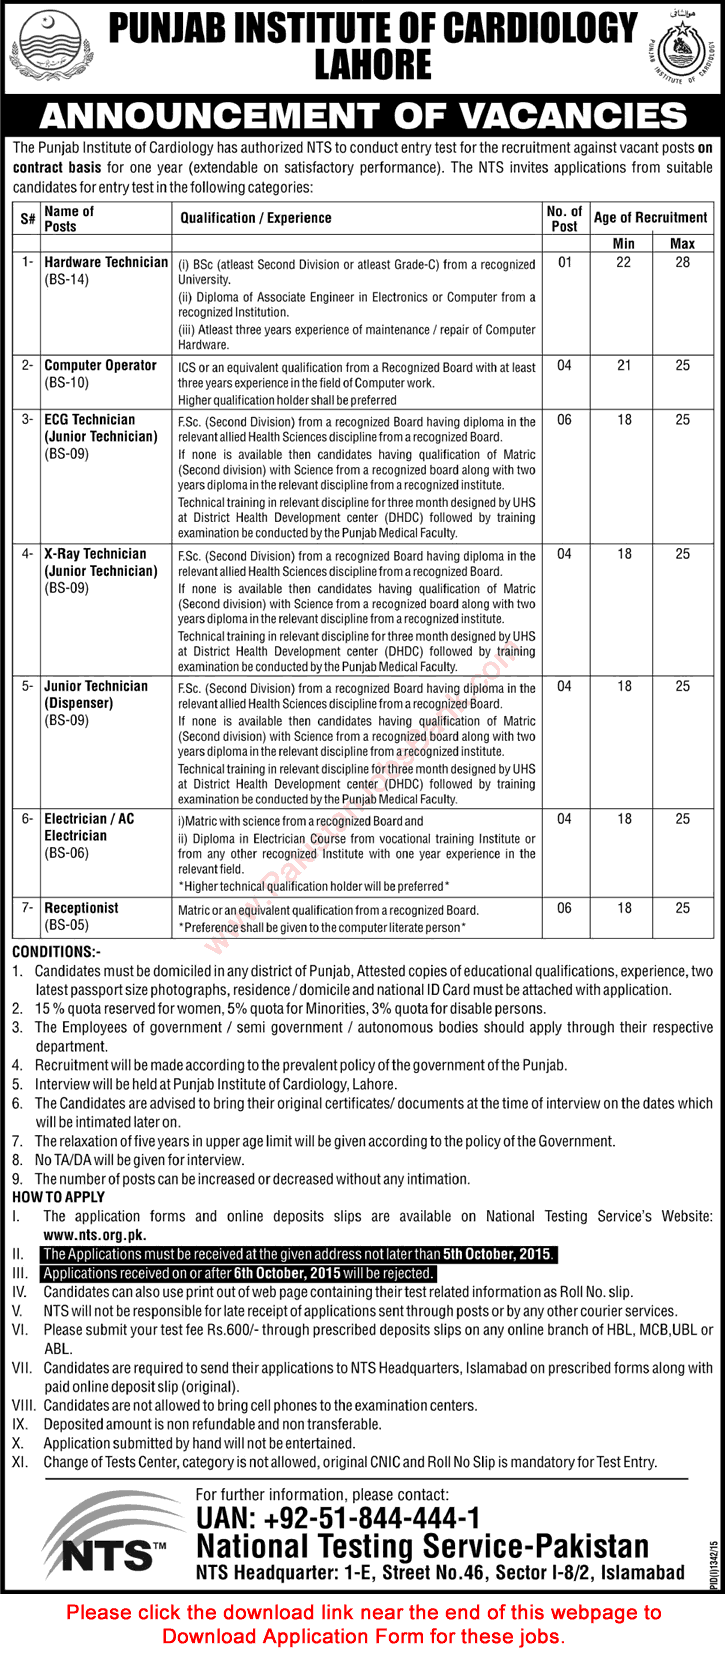 Punjab Institute of Cardiology Lahore Jobs 2015 September NTS Application Form Medical Technicians & Others